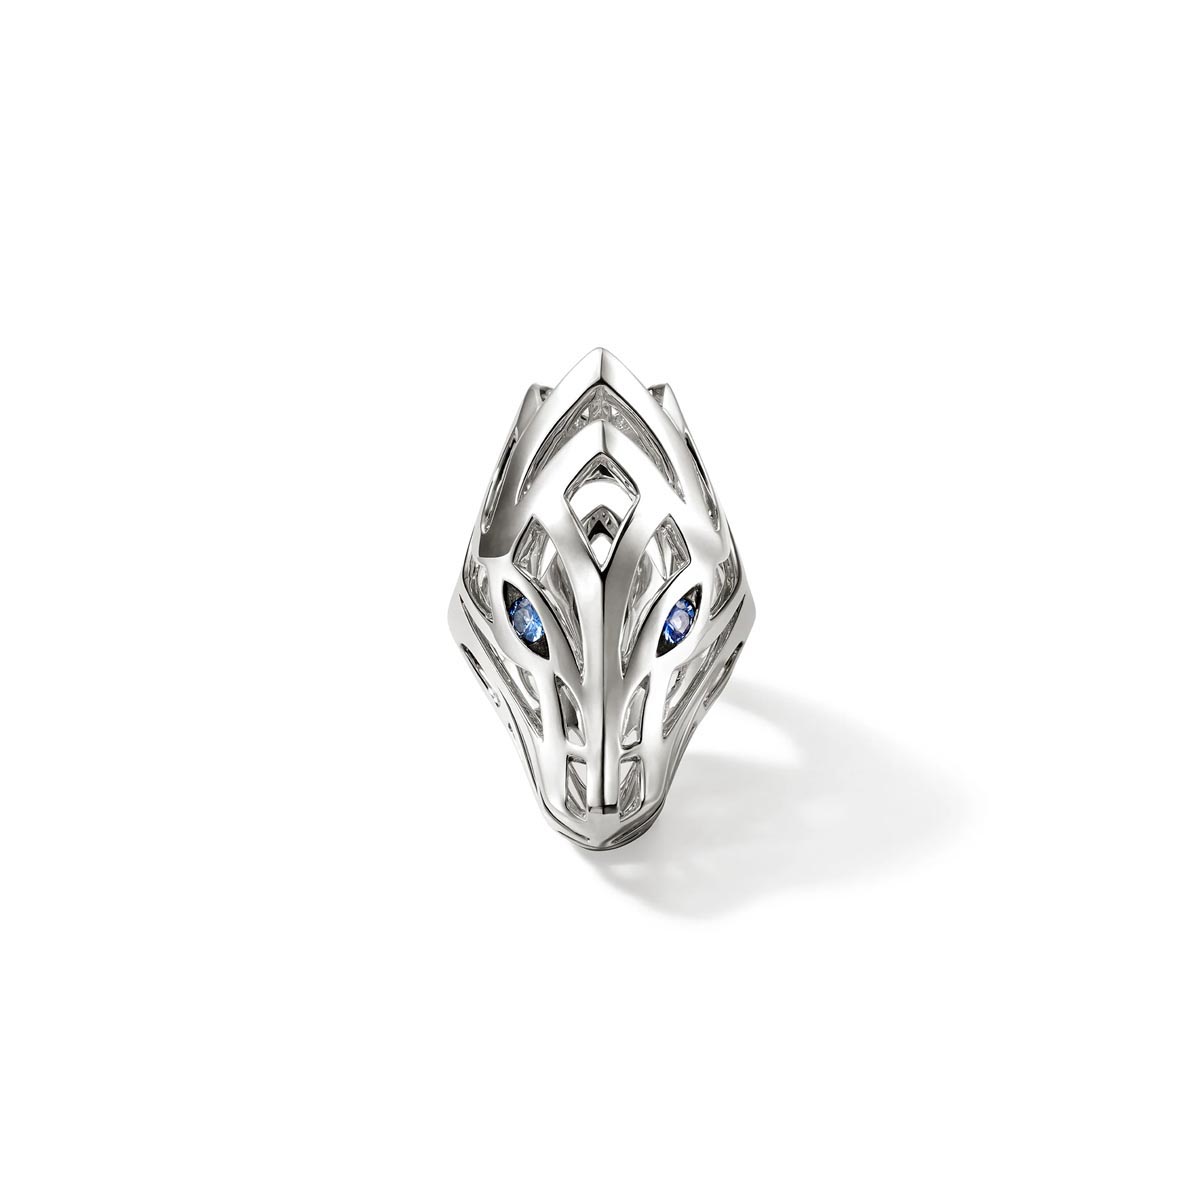 John Hardy Legends Naga Saddle Ring with Sapphires in Sterling Silver